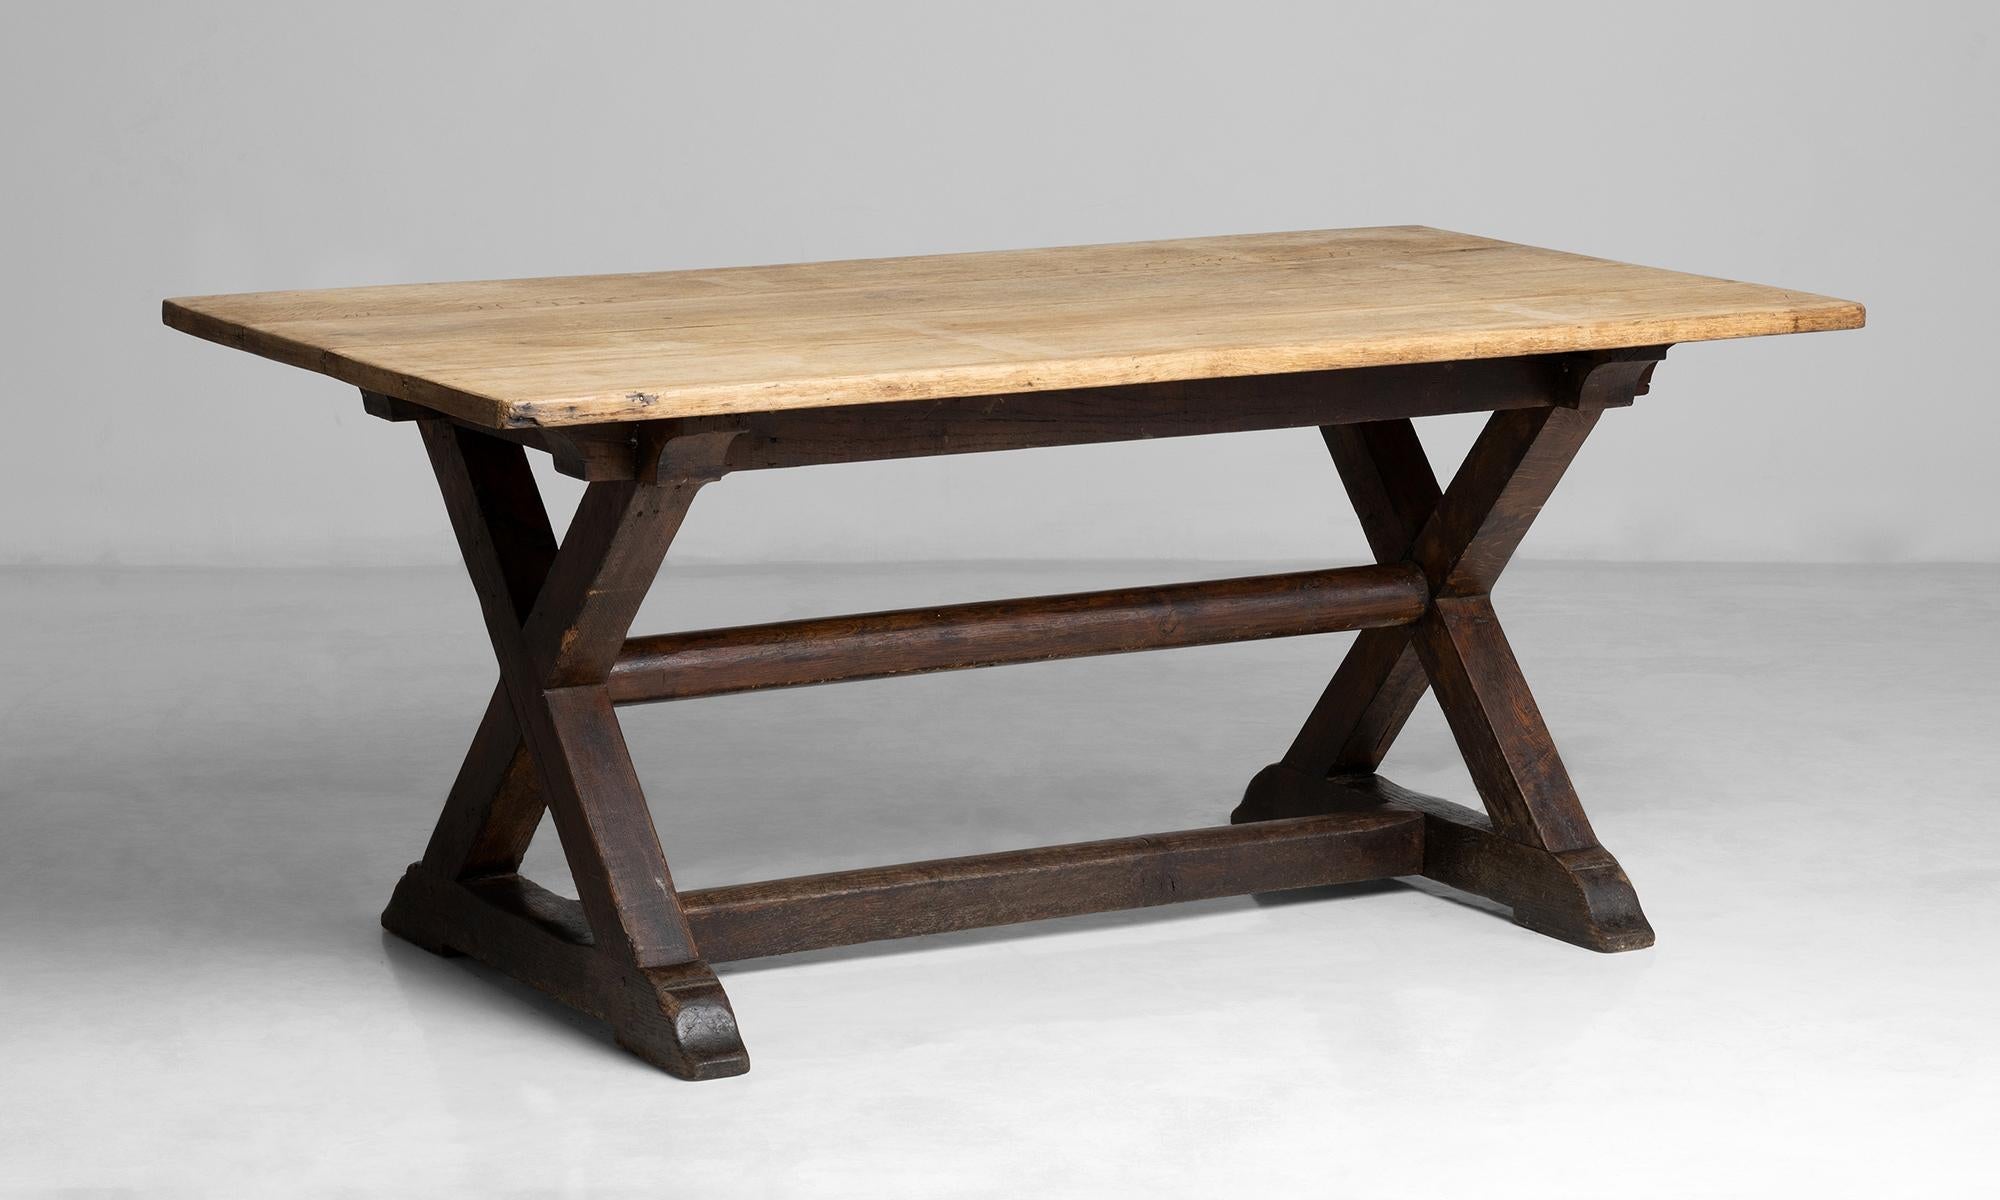 Oak X-frame table.

England circa 1890.

Constructed in oak with dark finish to base and scrubbed top.

Measures: 66”L x 35.5”D x 29”H.
 